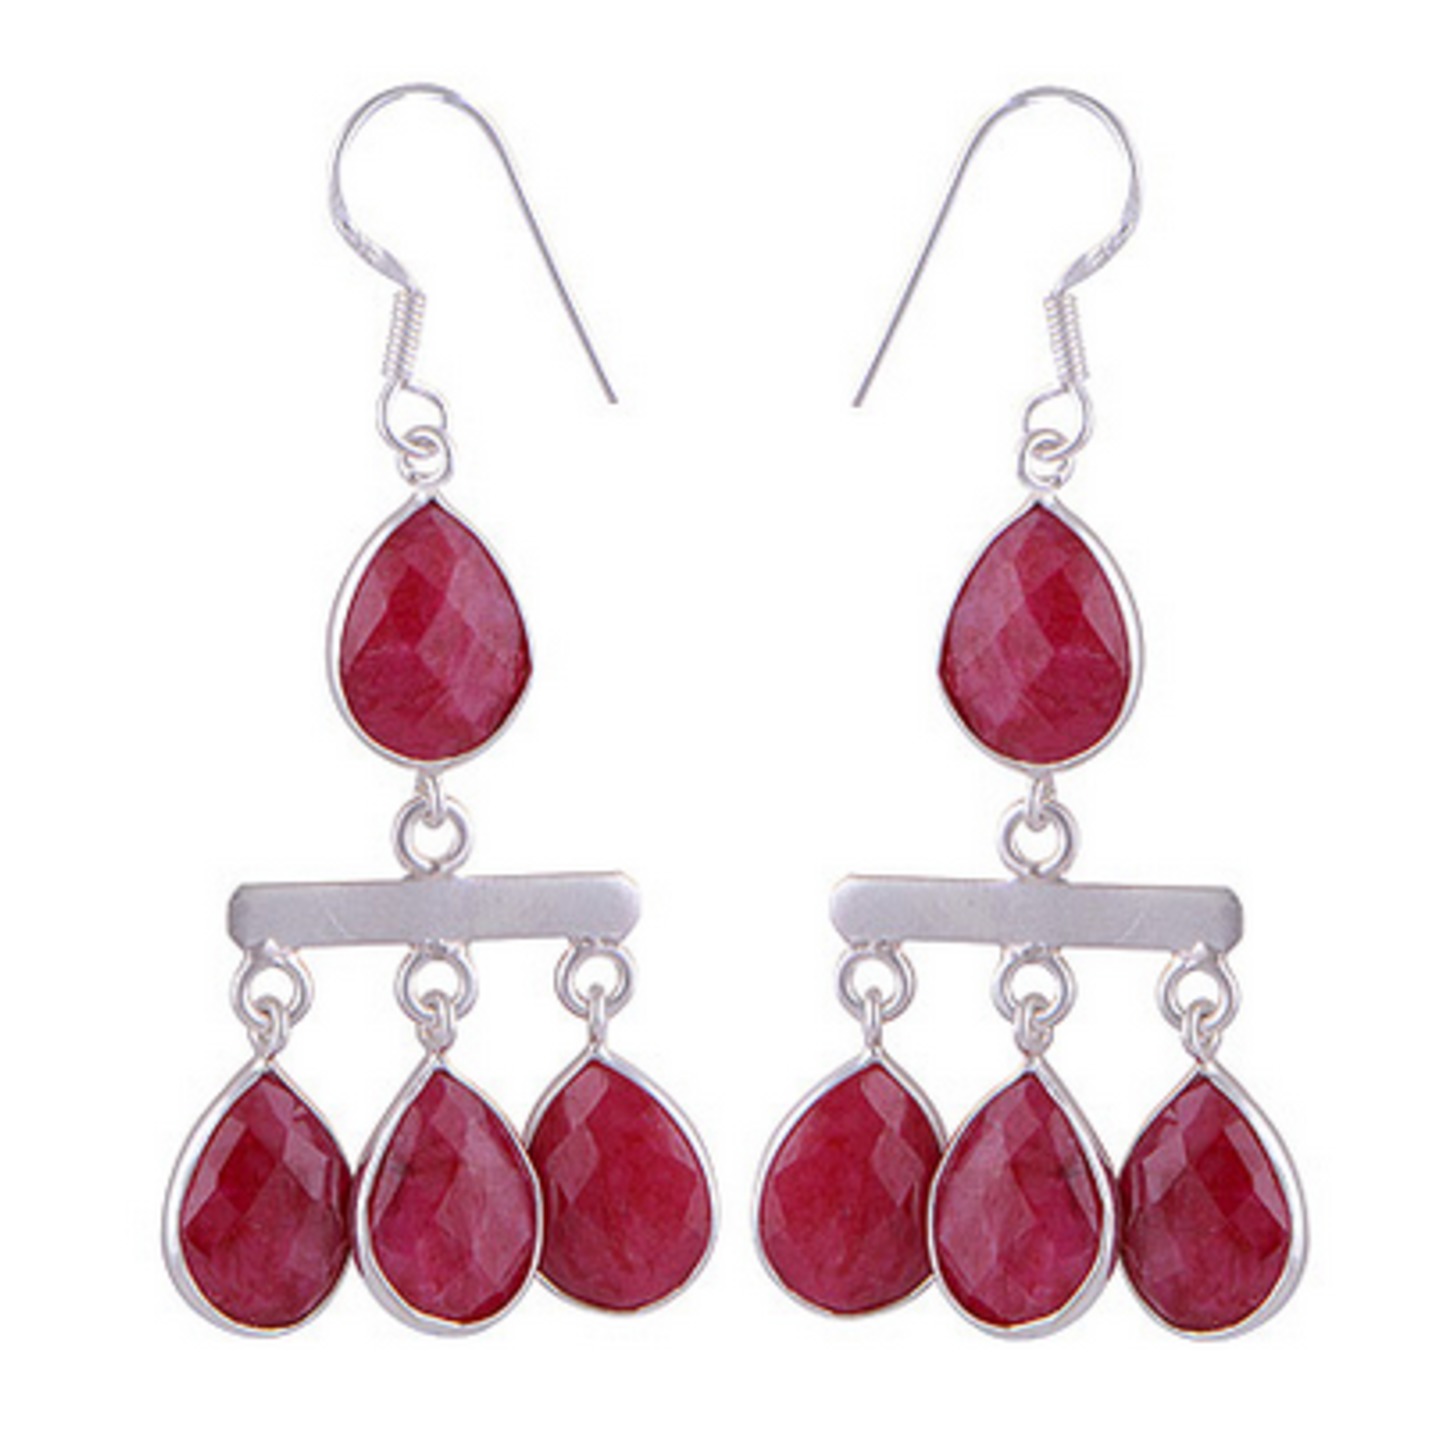 The Berry Silver Earring